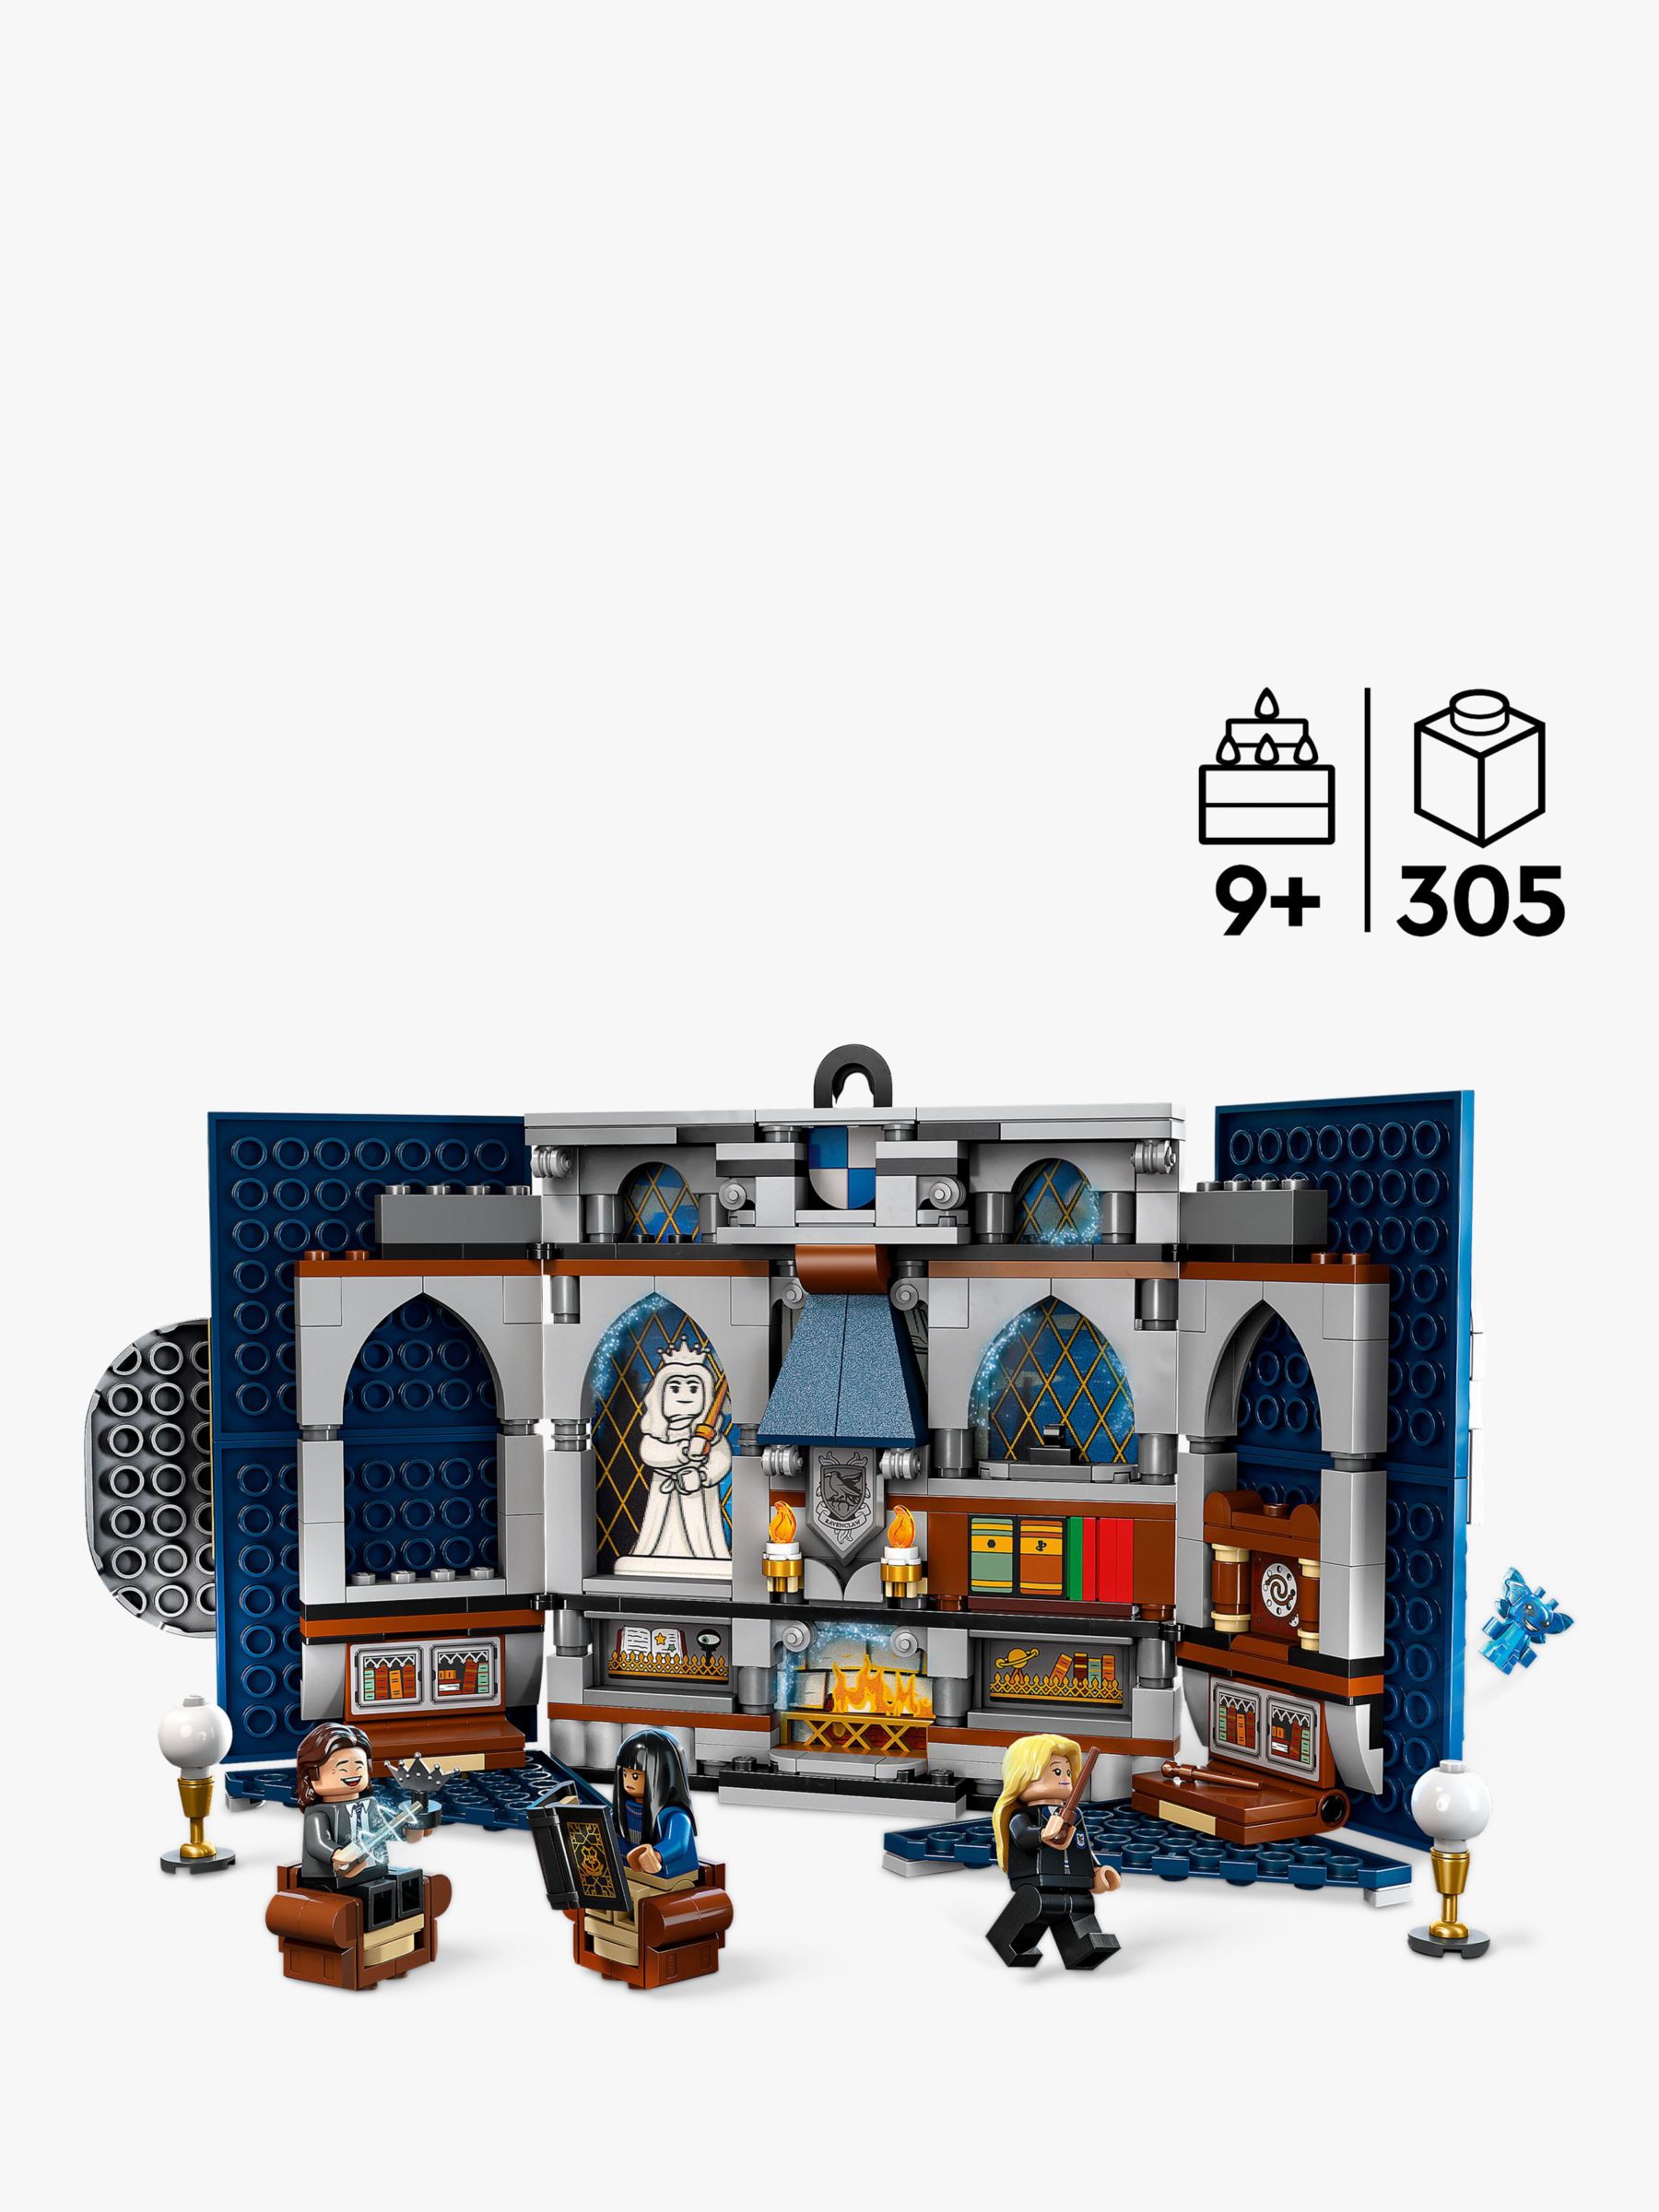 Ravenclaw™ House